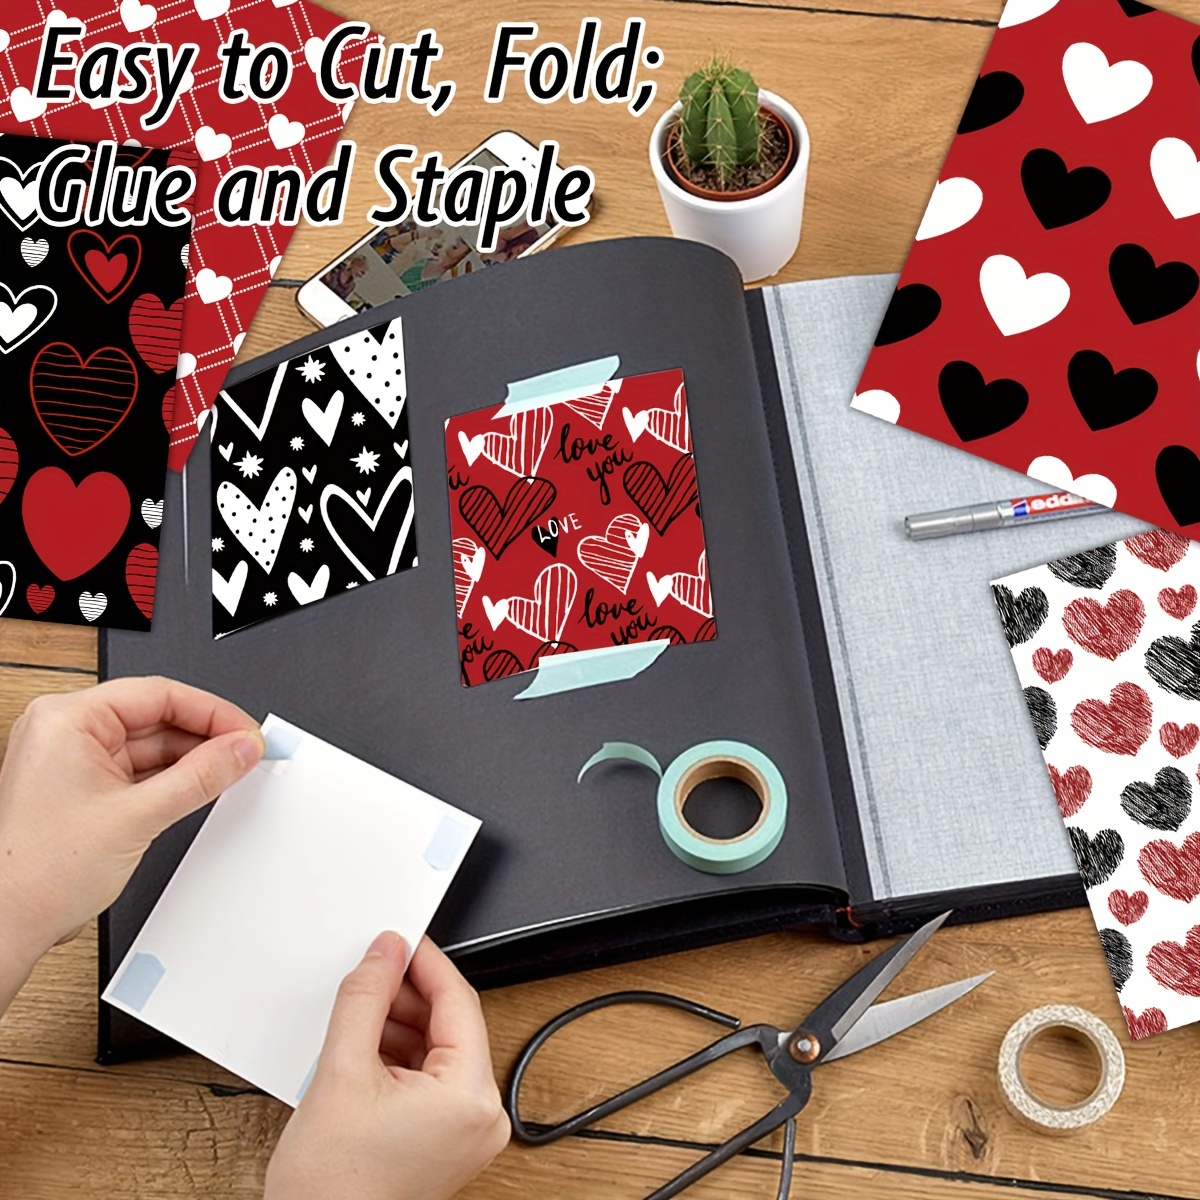 How to Quickly make Double Sided Scrapbook Paper 